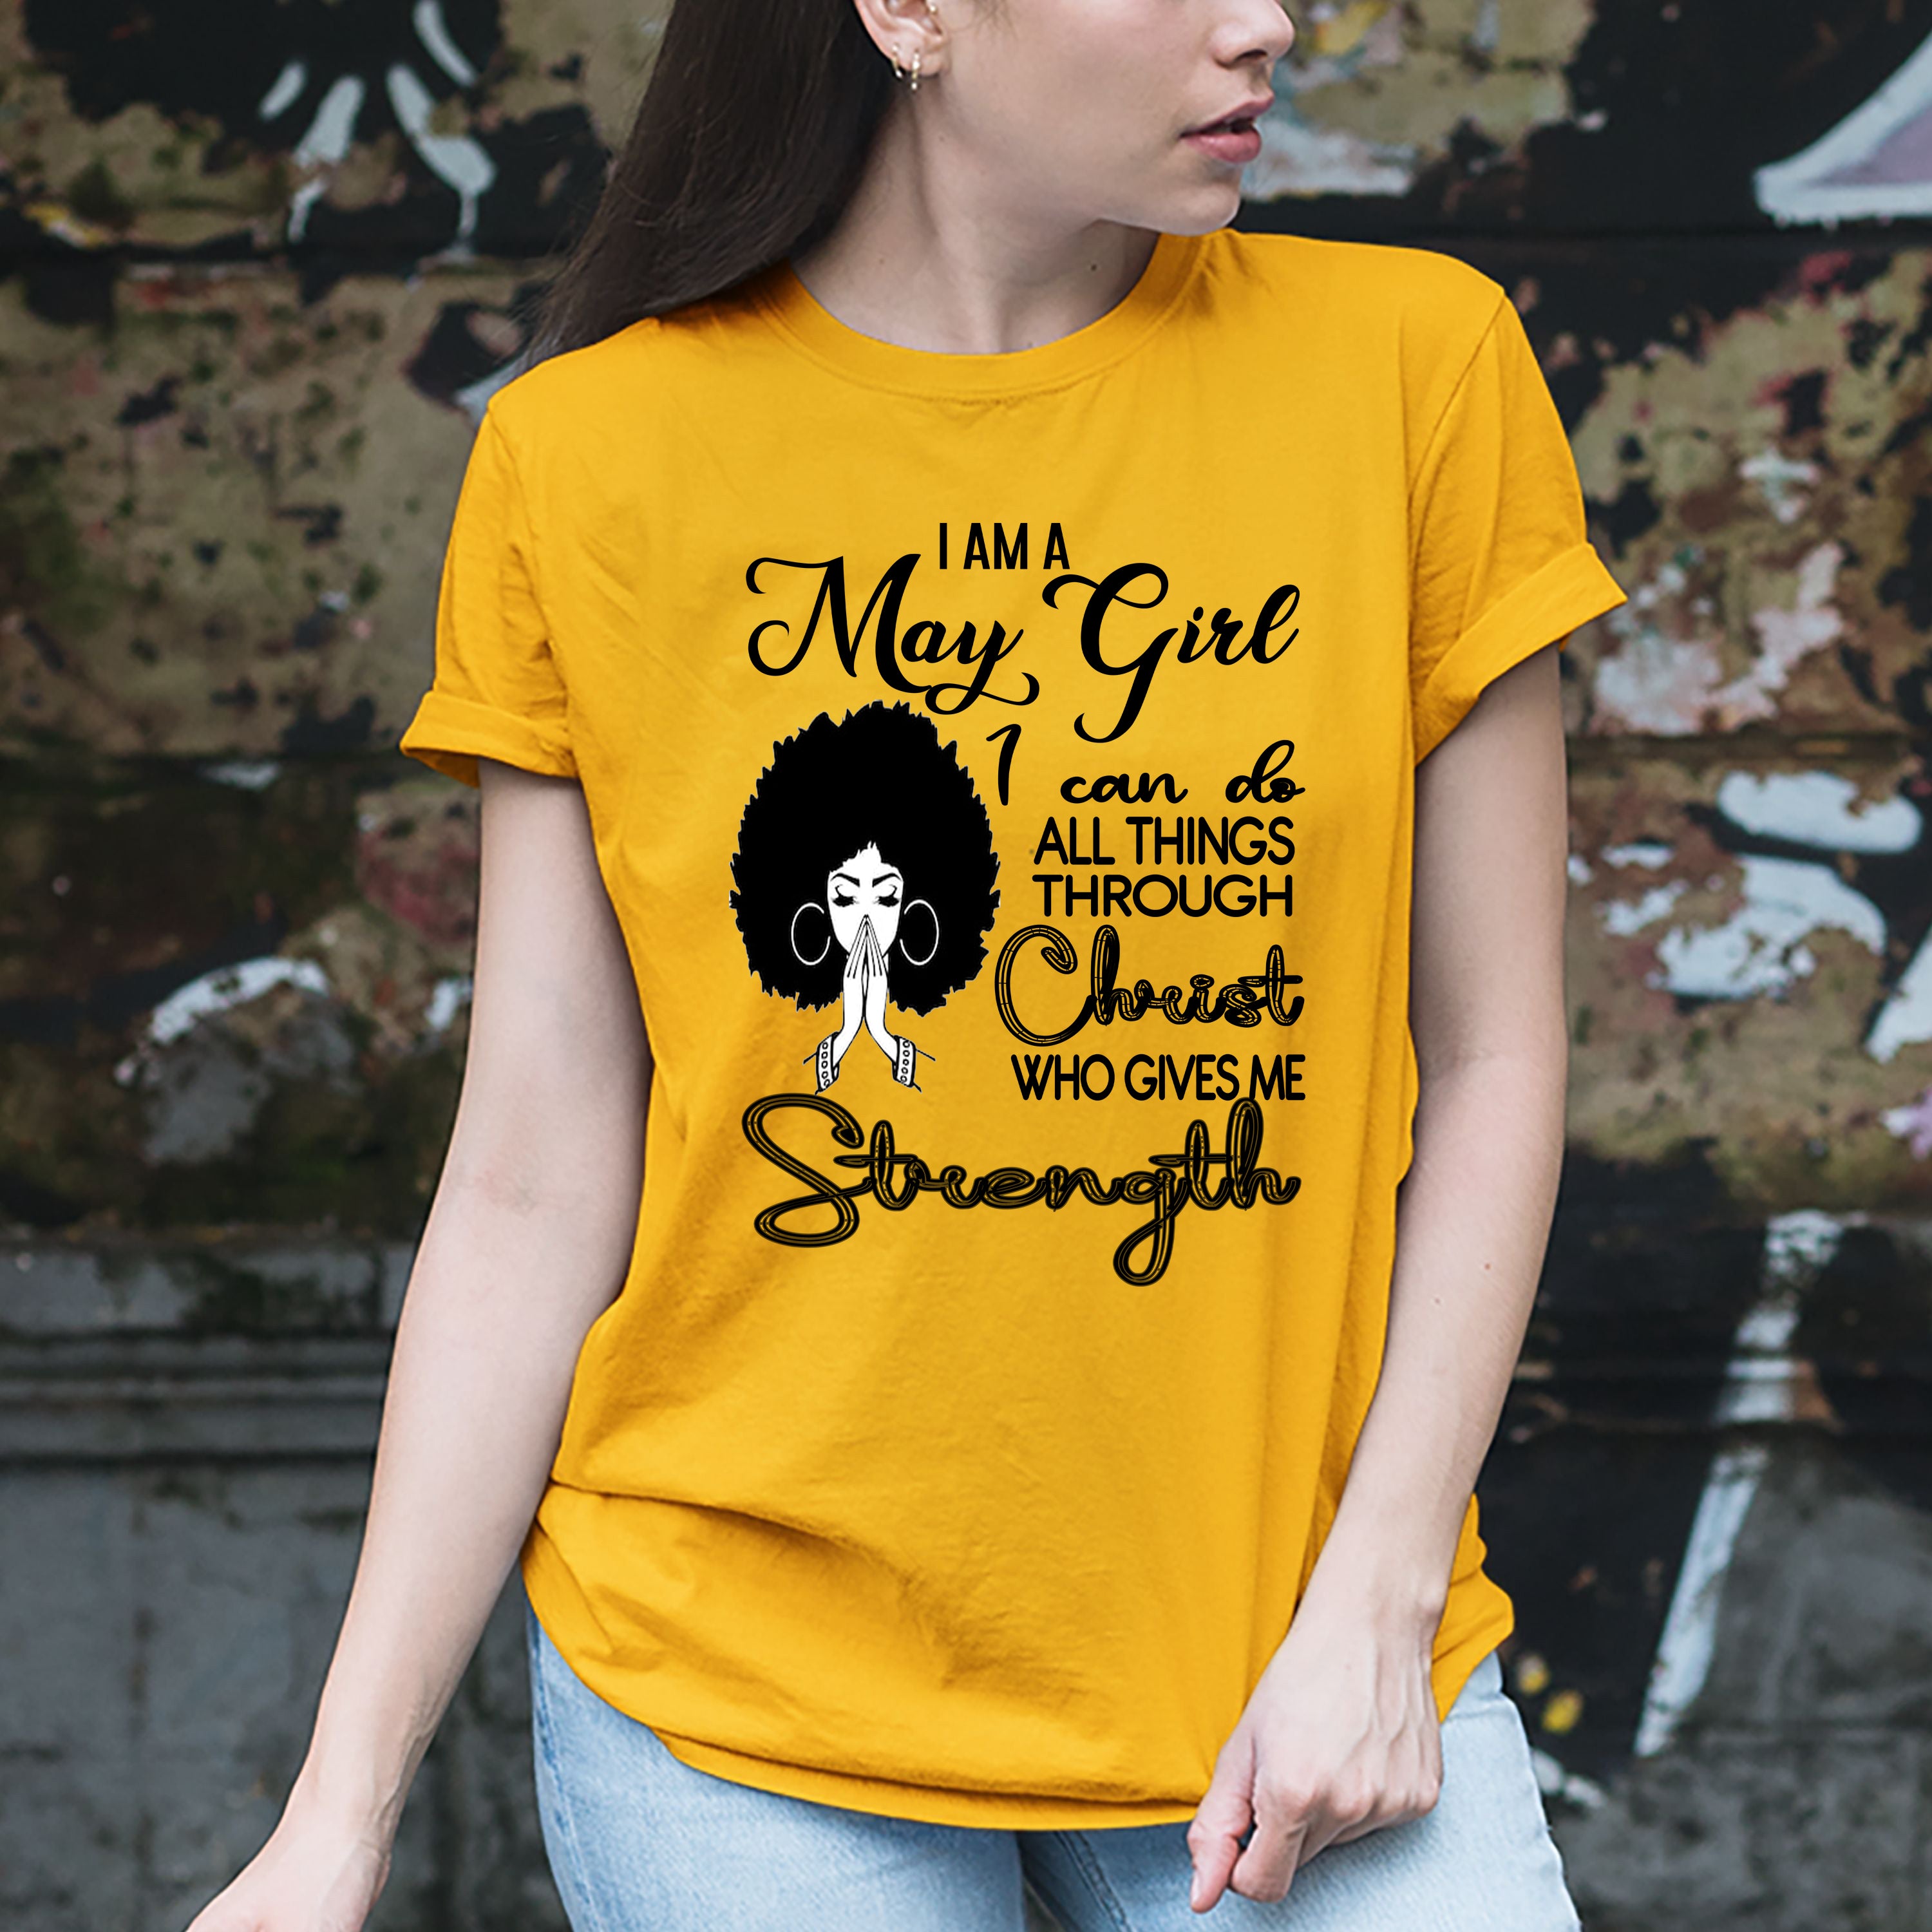 "MAY GIRL Can Do All Things Through Christ Who Gives Me Strength",T-Shirt.